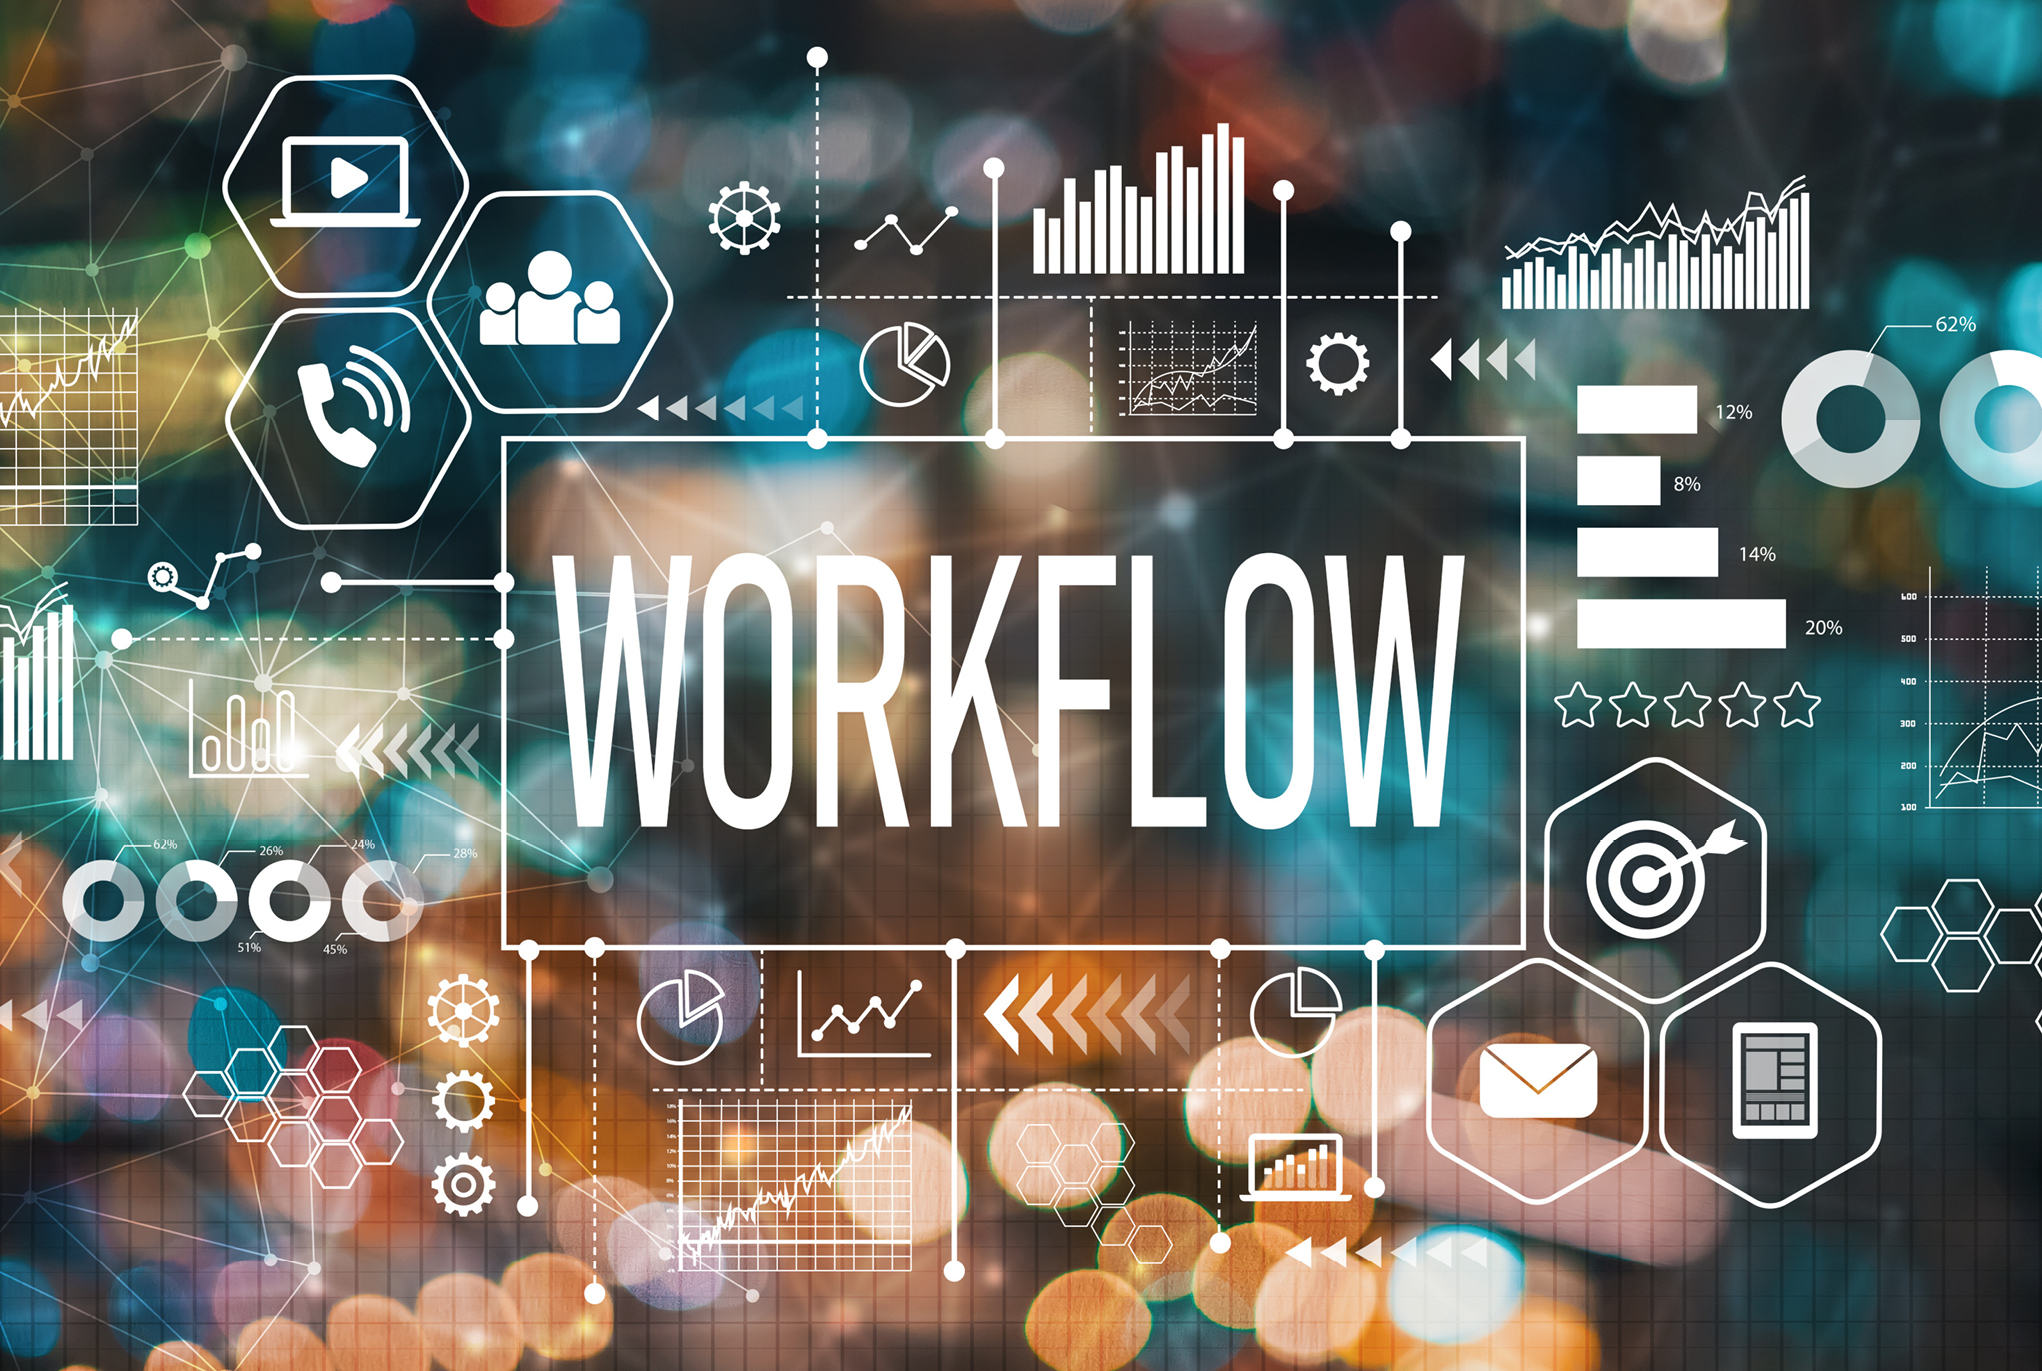 A workflow graphic with business related icons and graphs